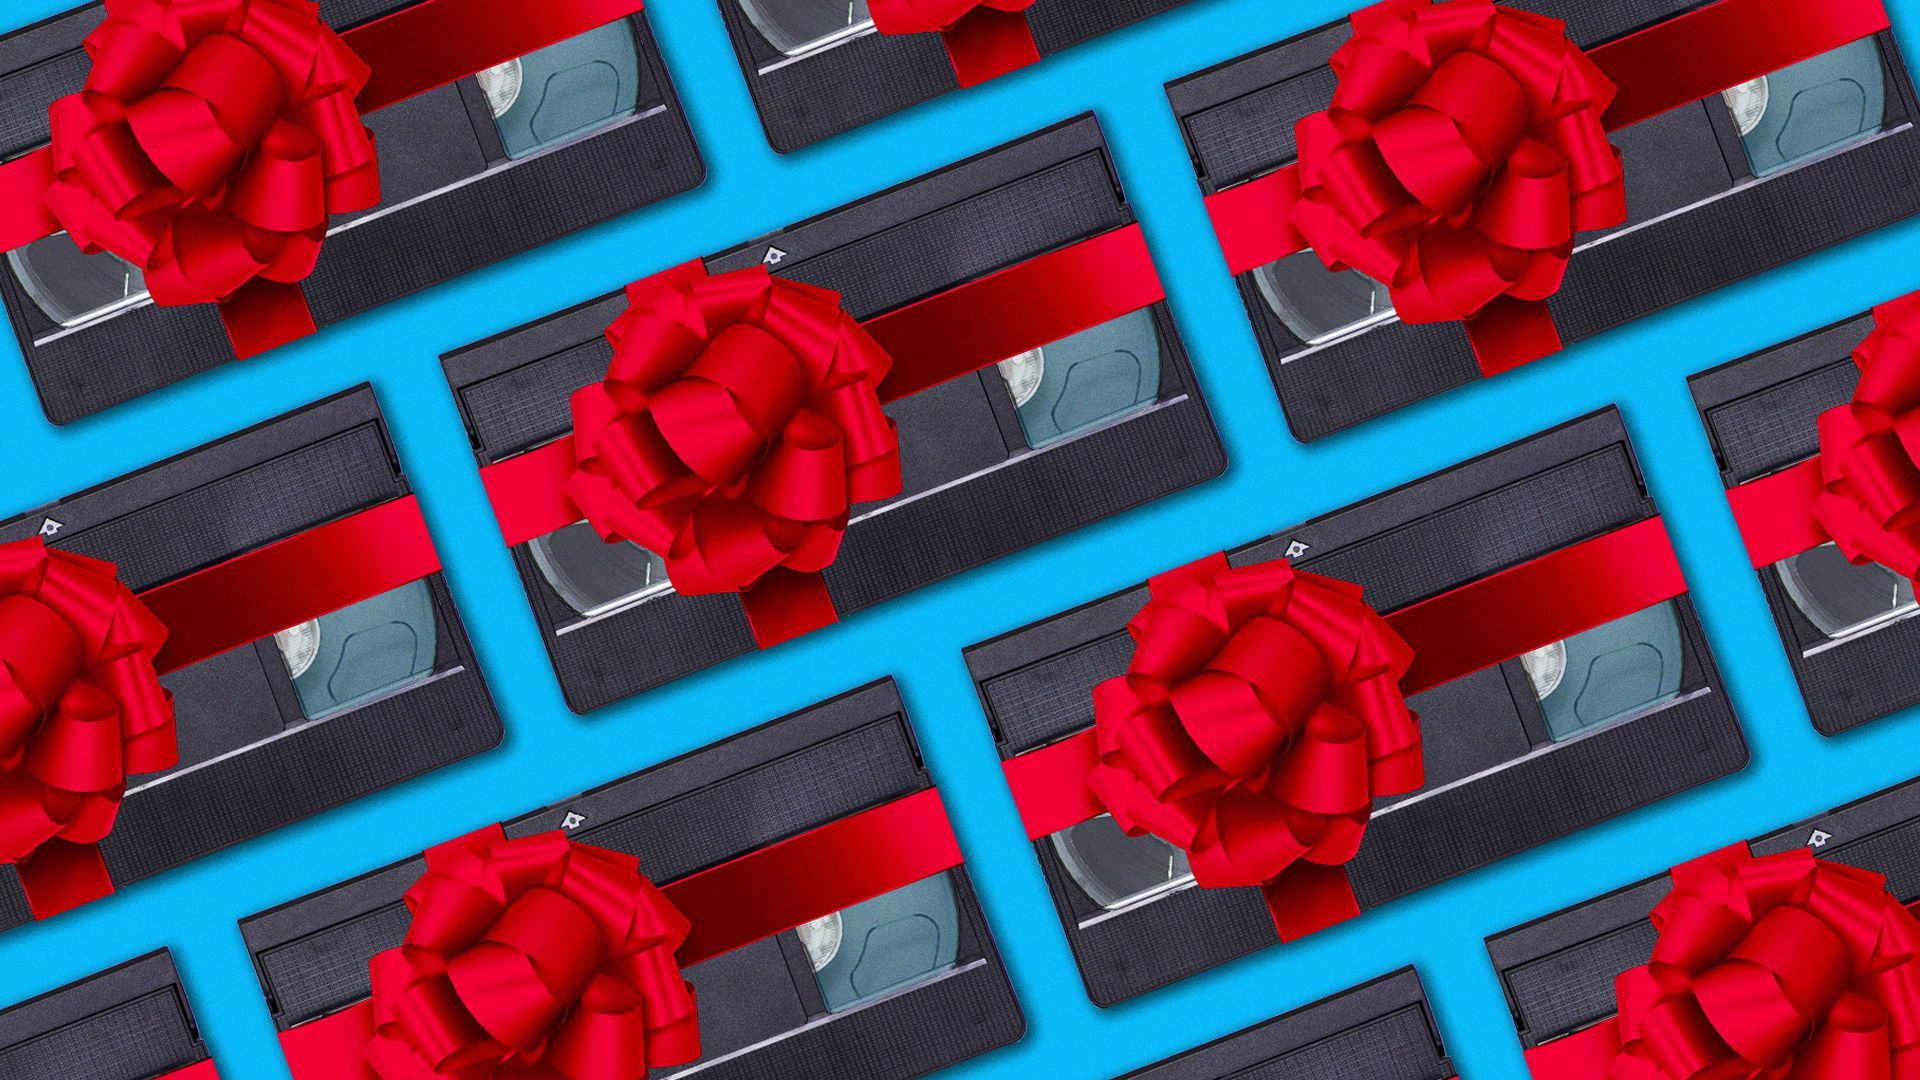 Pattern of VHS tapes wrapped in red ribbon on a blue background.